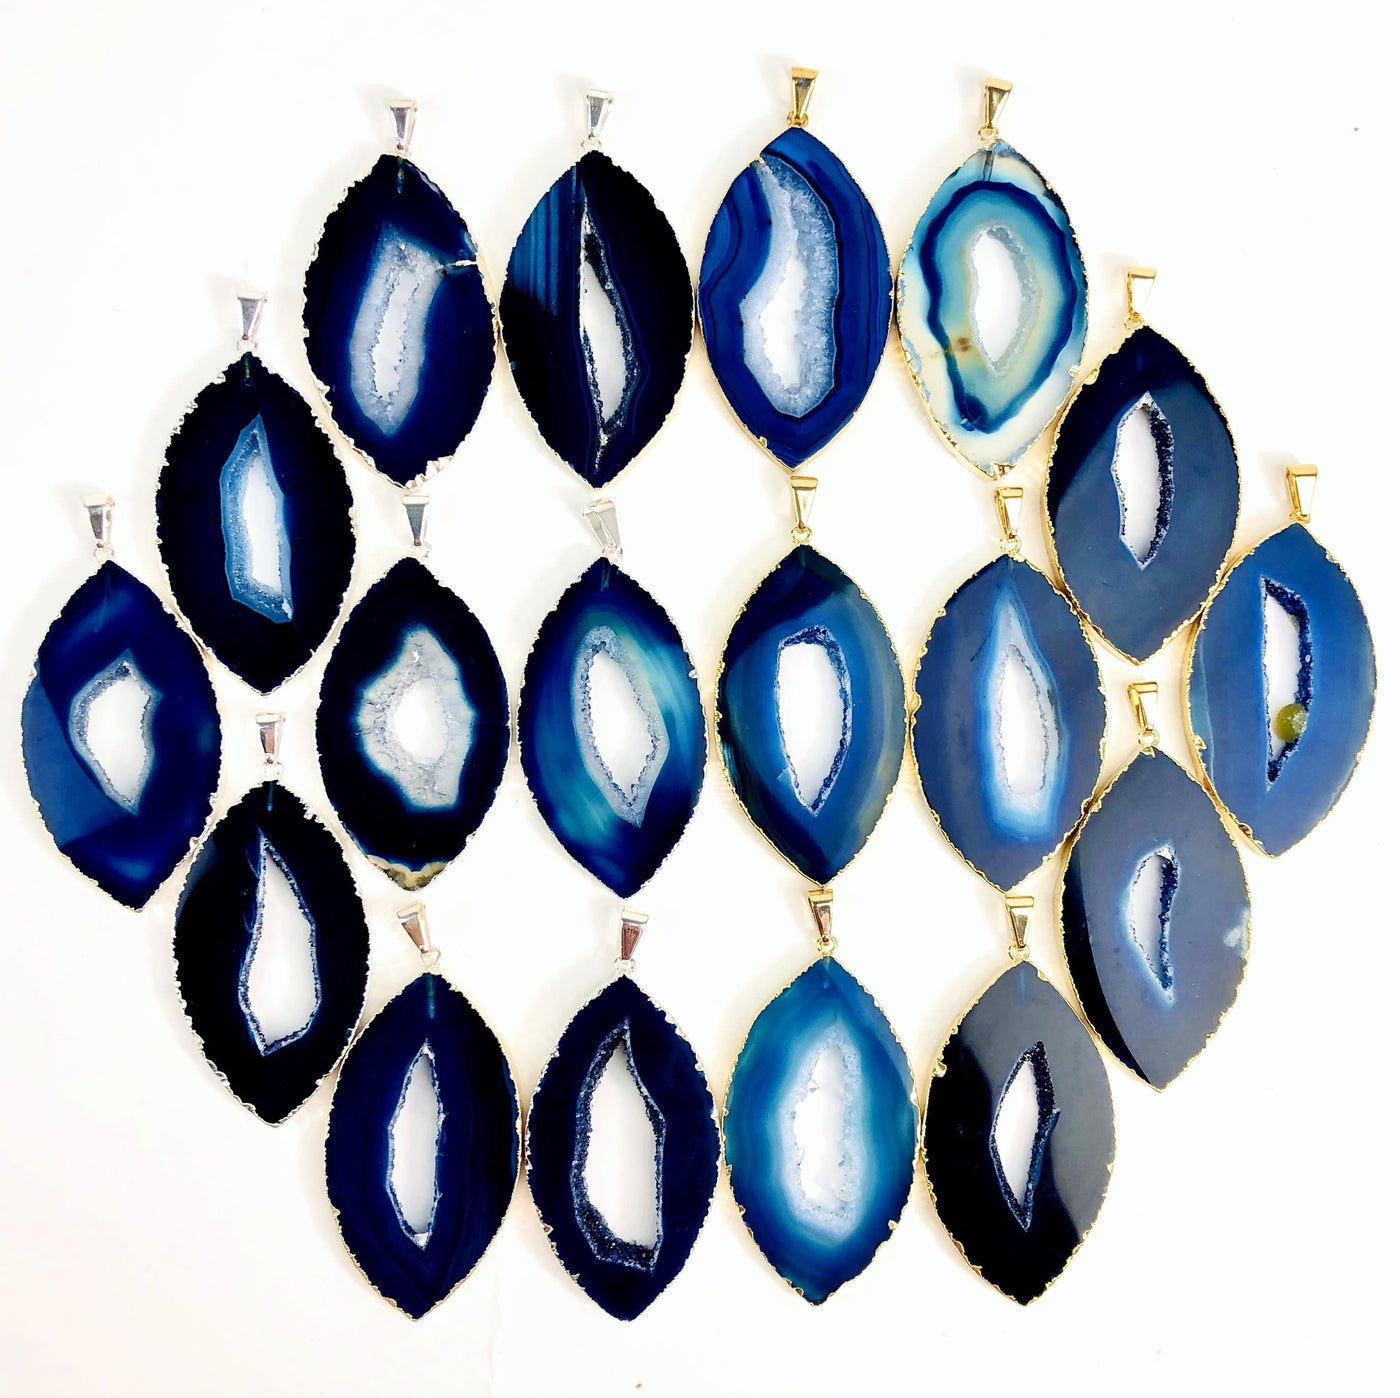 Front facing blue agate druzy marquise shape displaying silver and gold pendants. Color and pattern vary.